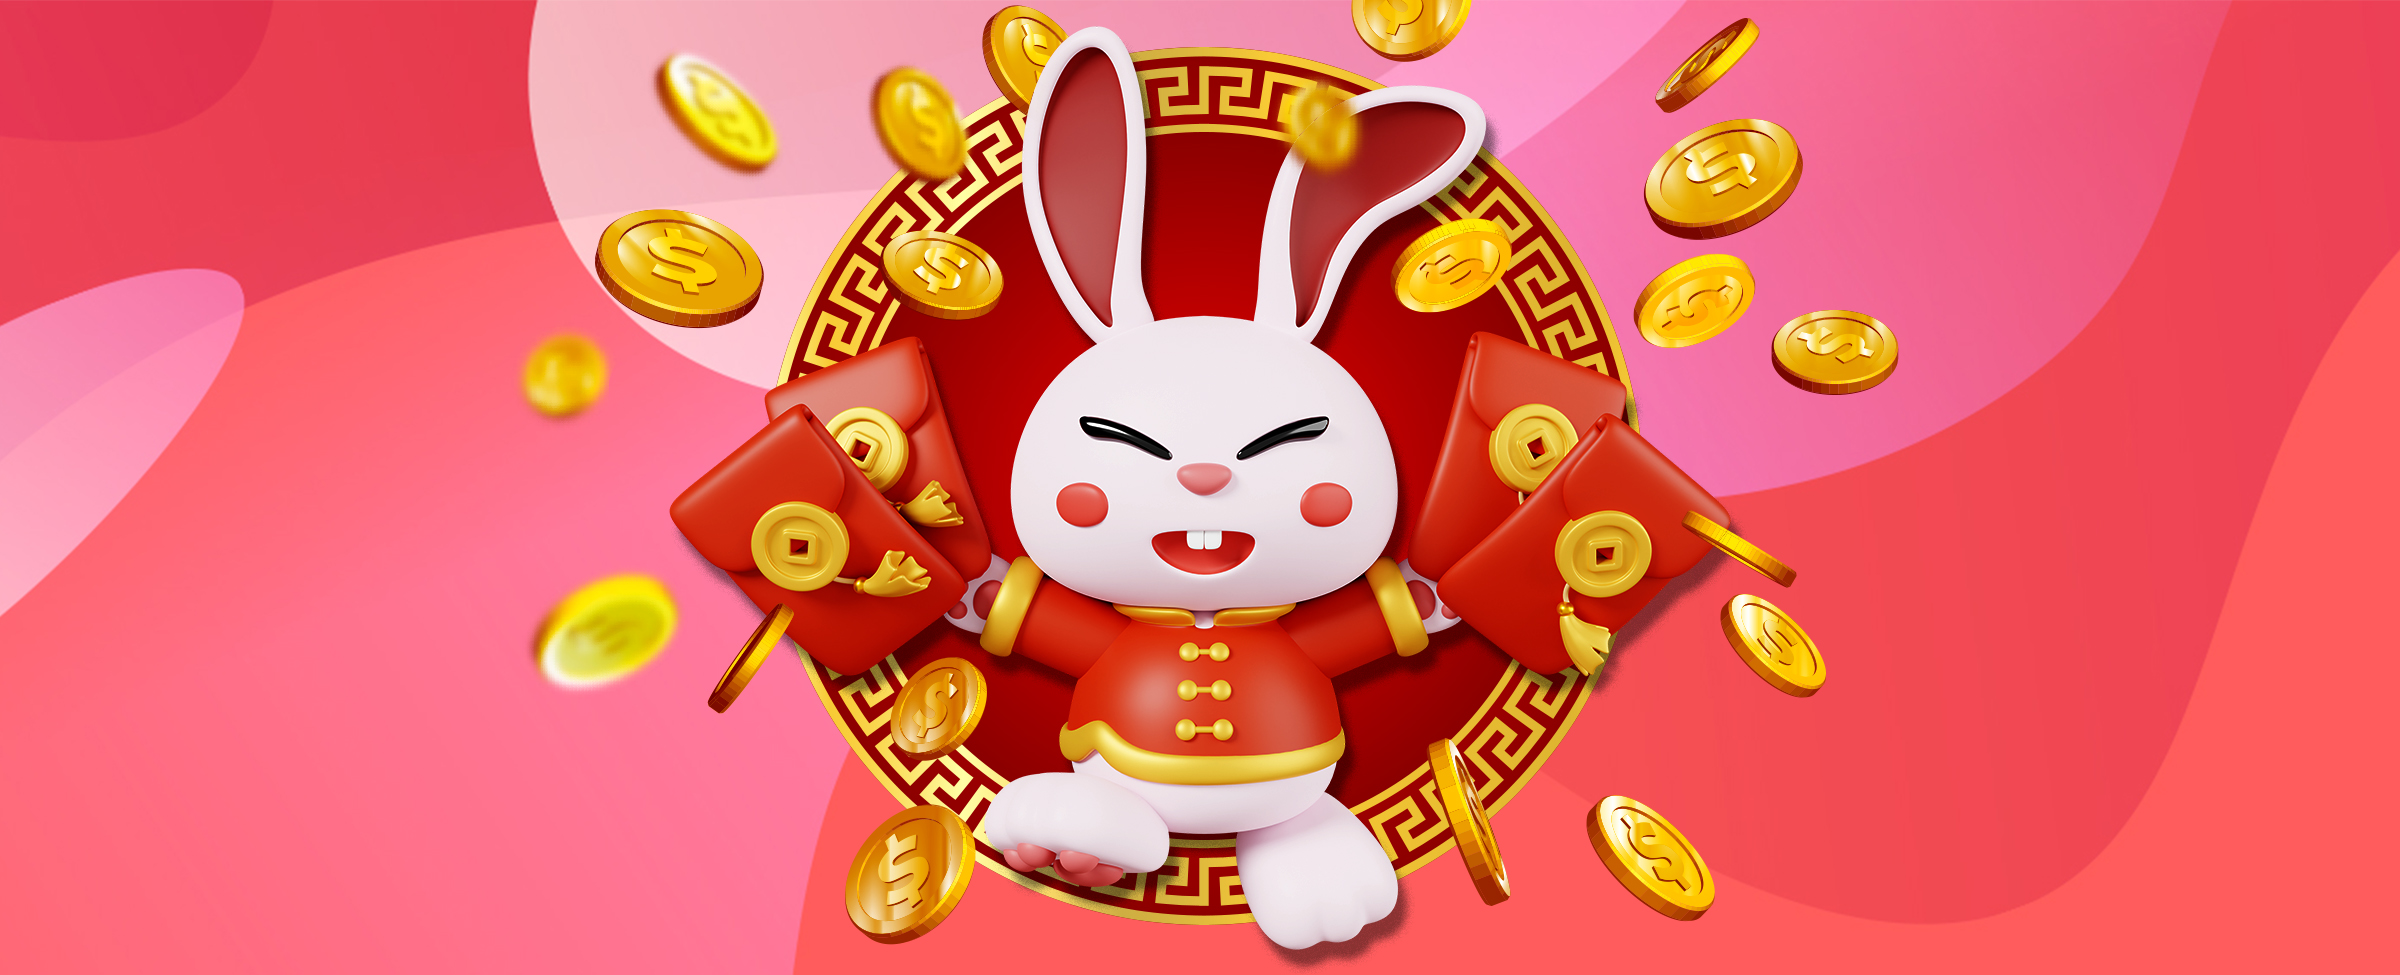 A white, 3D-animated cartoon rabbit with a red and gold Chinese emperor-style jacket is seen bounding out of a circular red portal framed by a golden Chinese pattern, holding up lucky red envelopes in each hand, surrounded by an explosion of gold coins. Behind, is a red multi-toned abstract background.